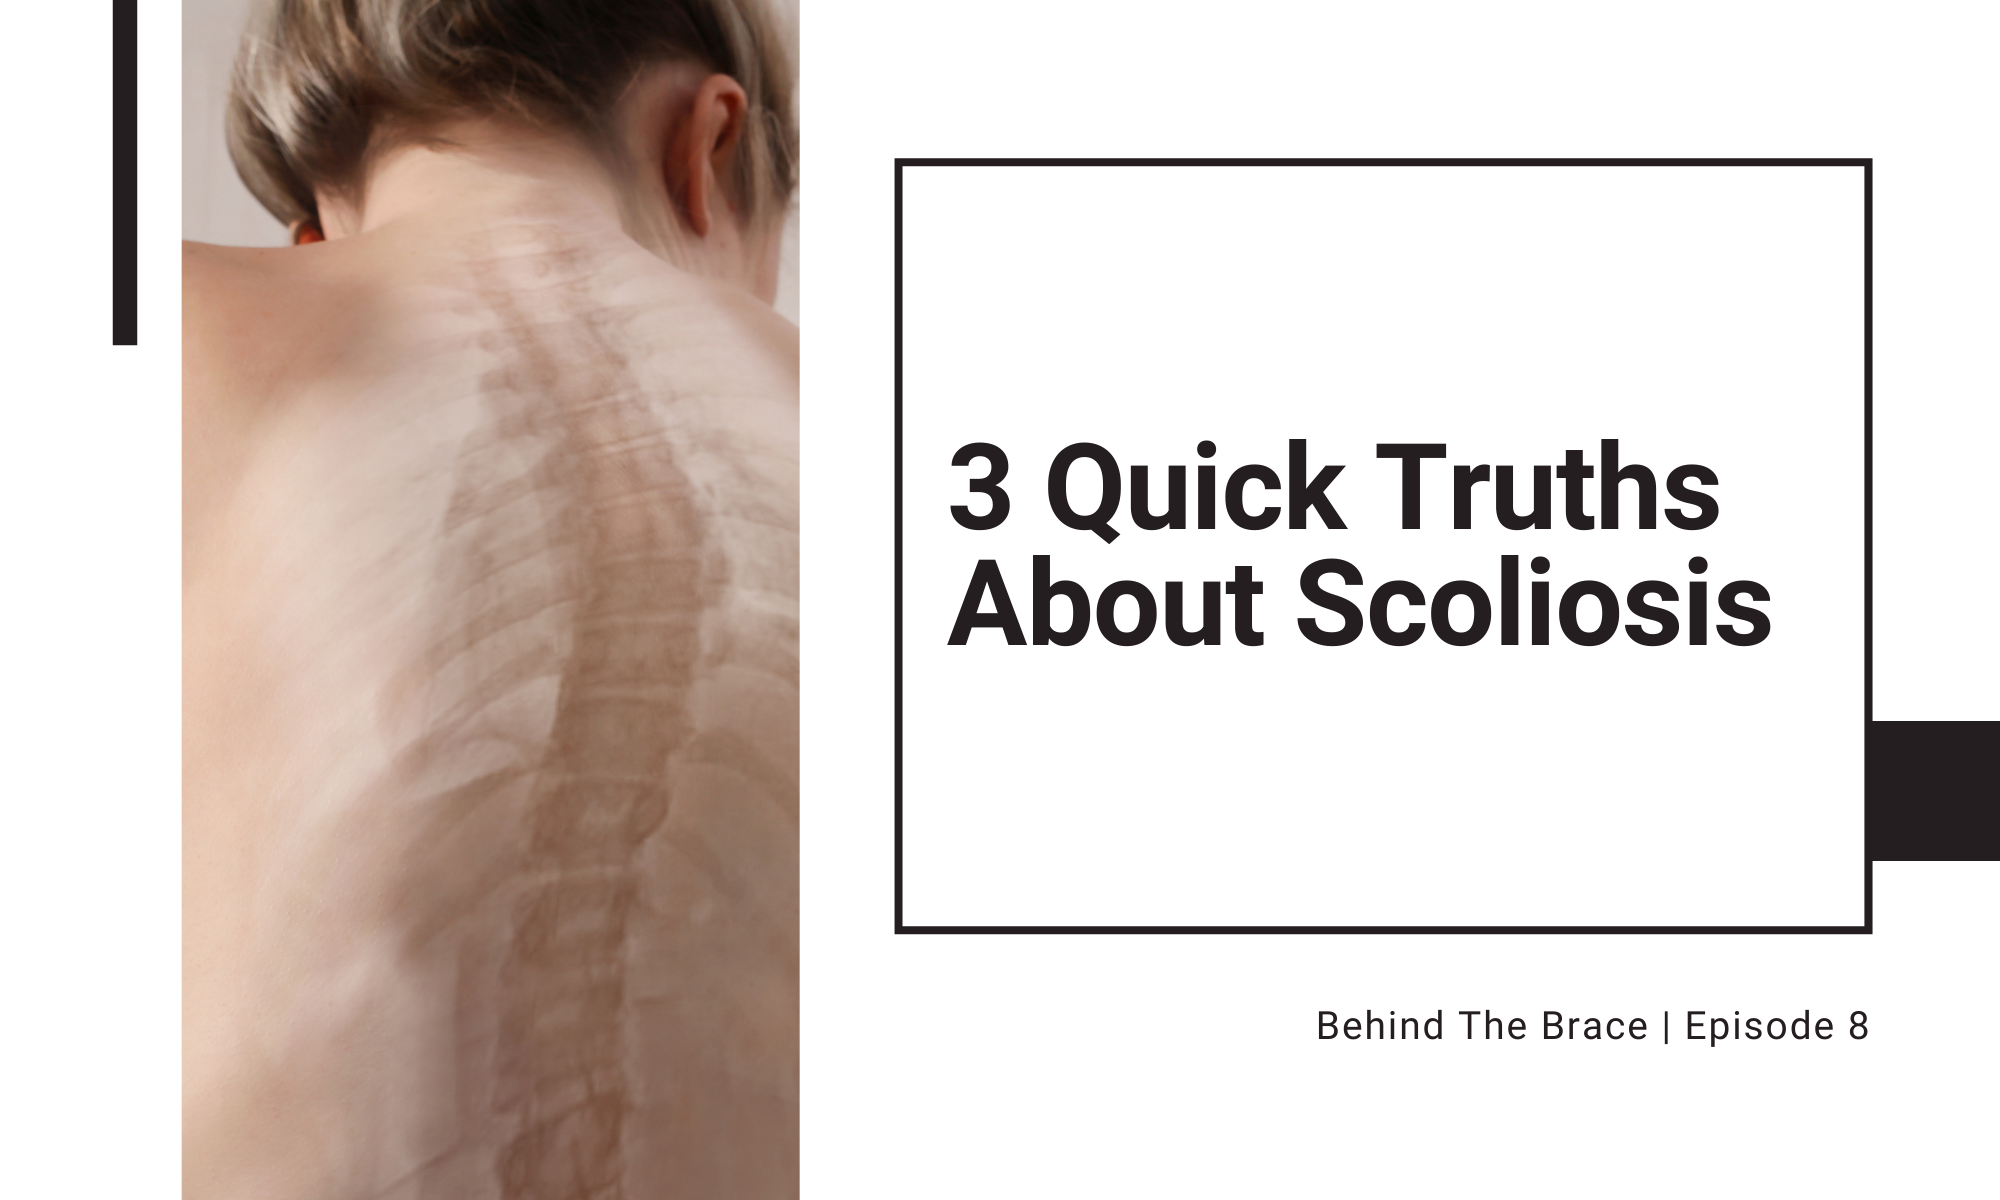 3 Quick Truths About Scoliosis